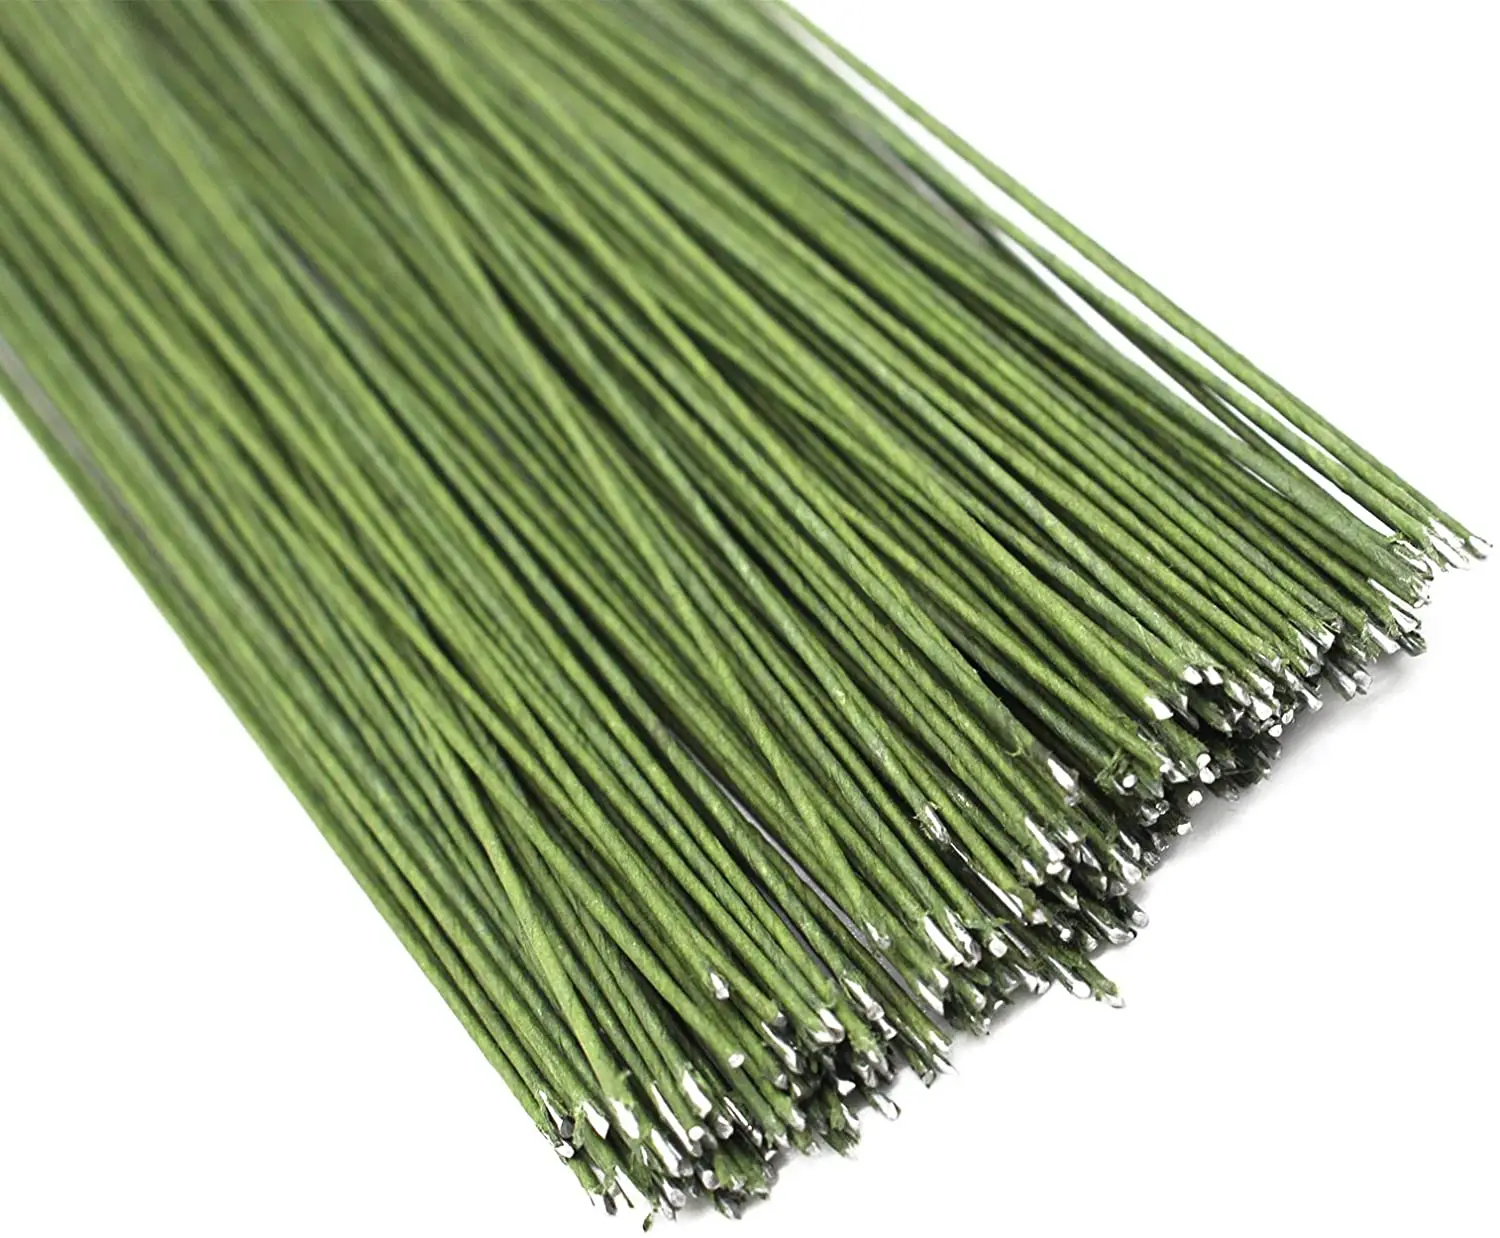 100PCS 18Ga Floral Stem Wires Green Crafting Floral Stem Wire for DIY  Crafts and Flower Arrangement 14 Inches